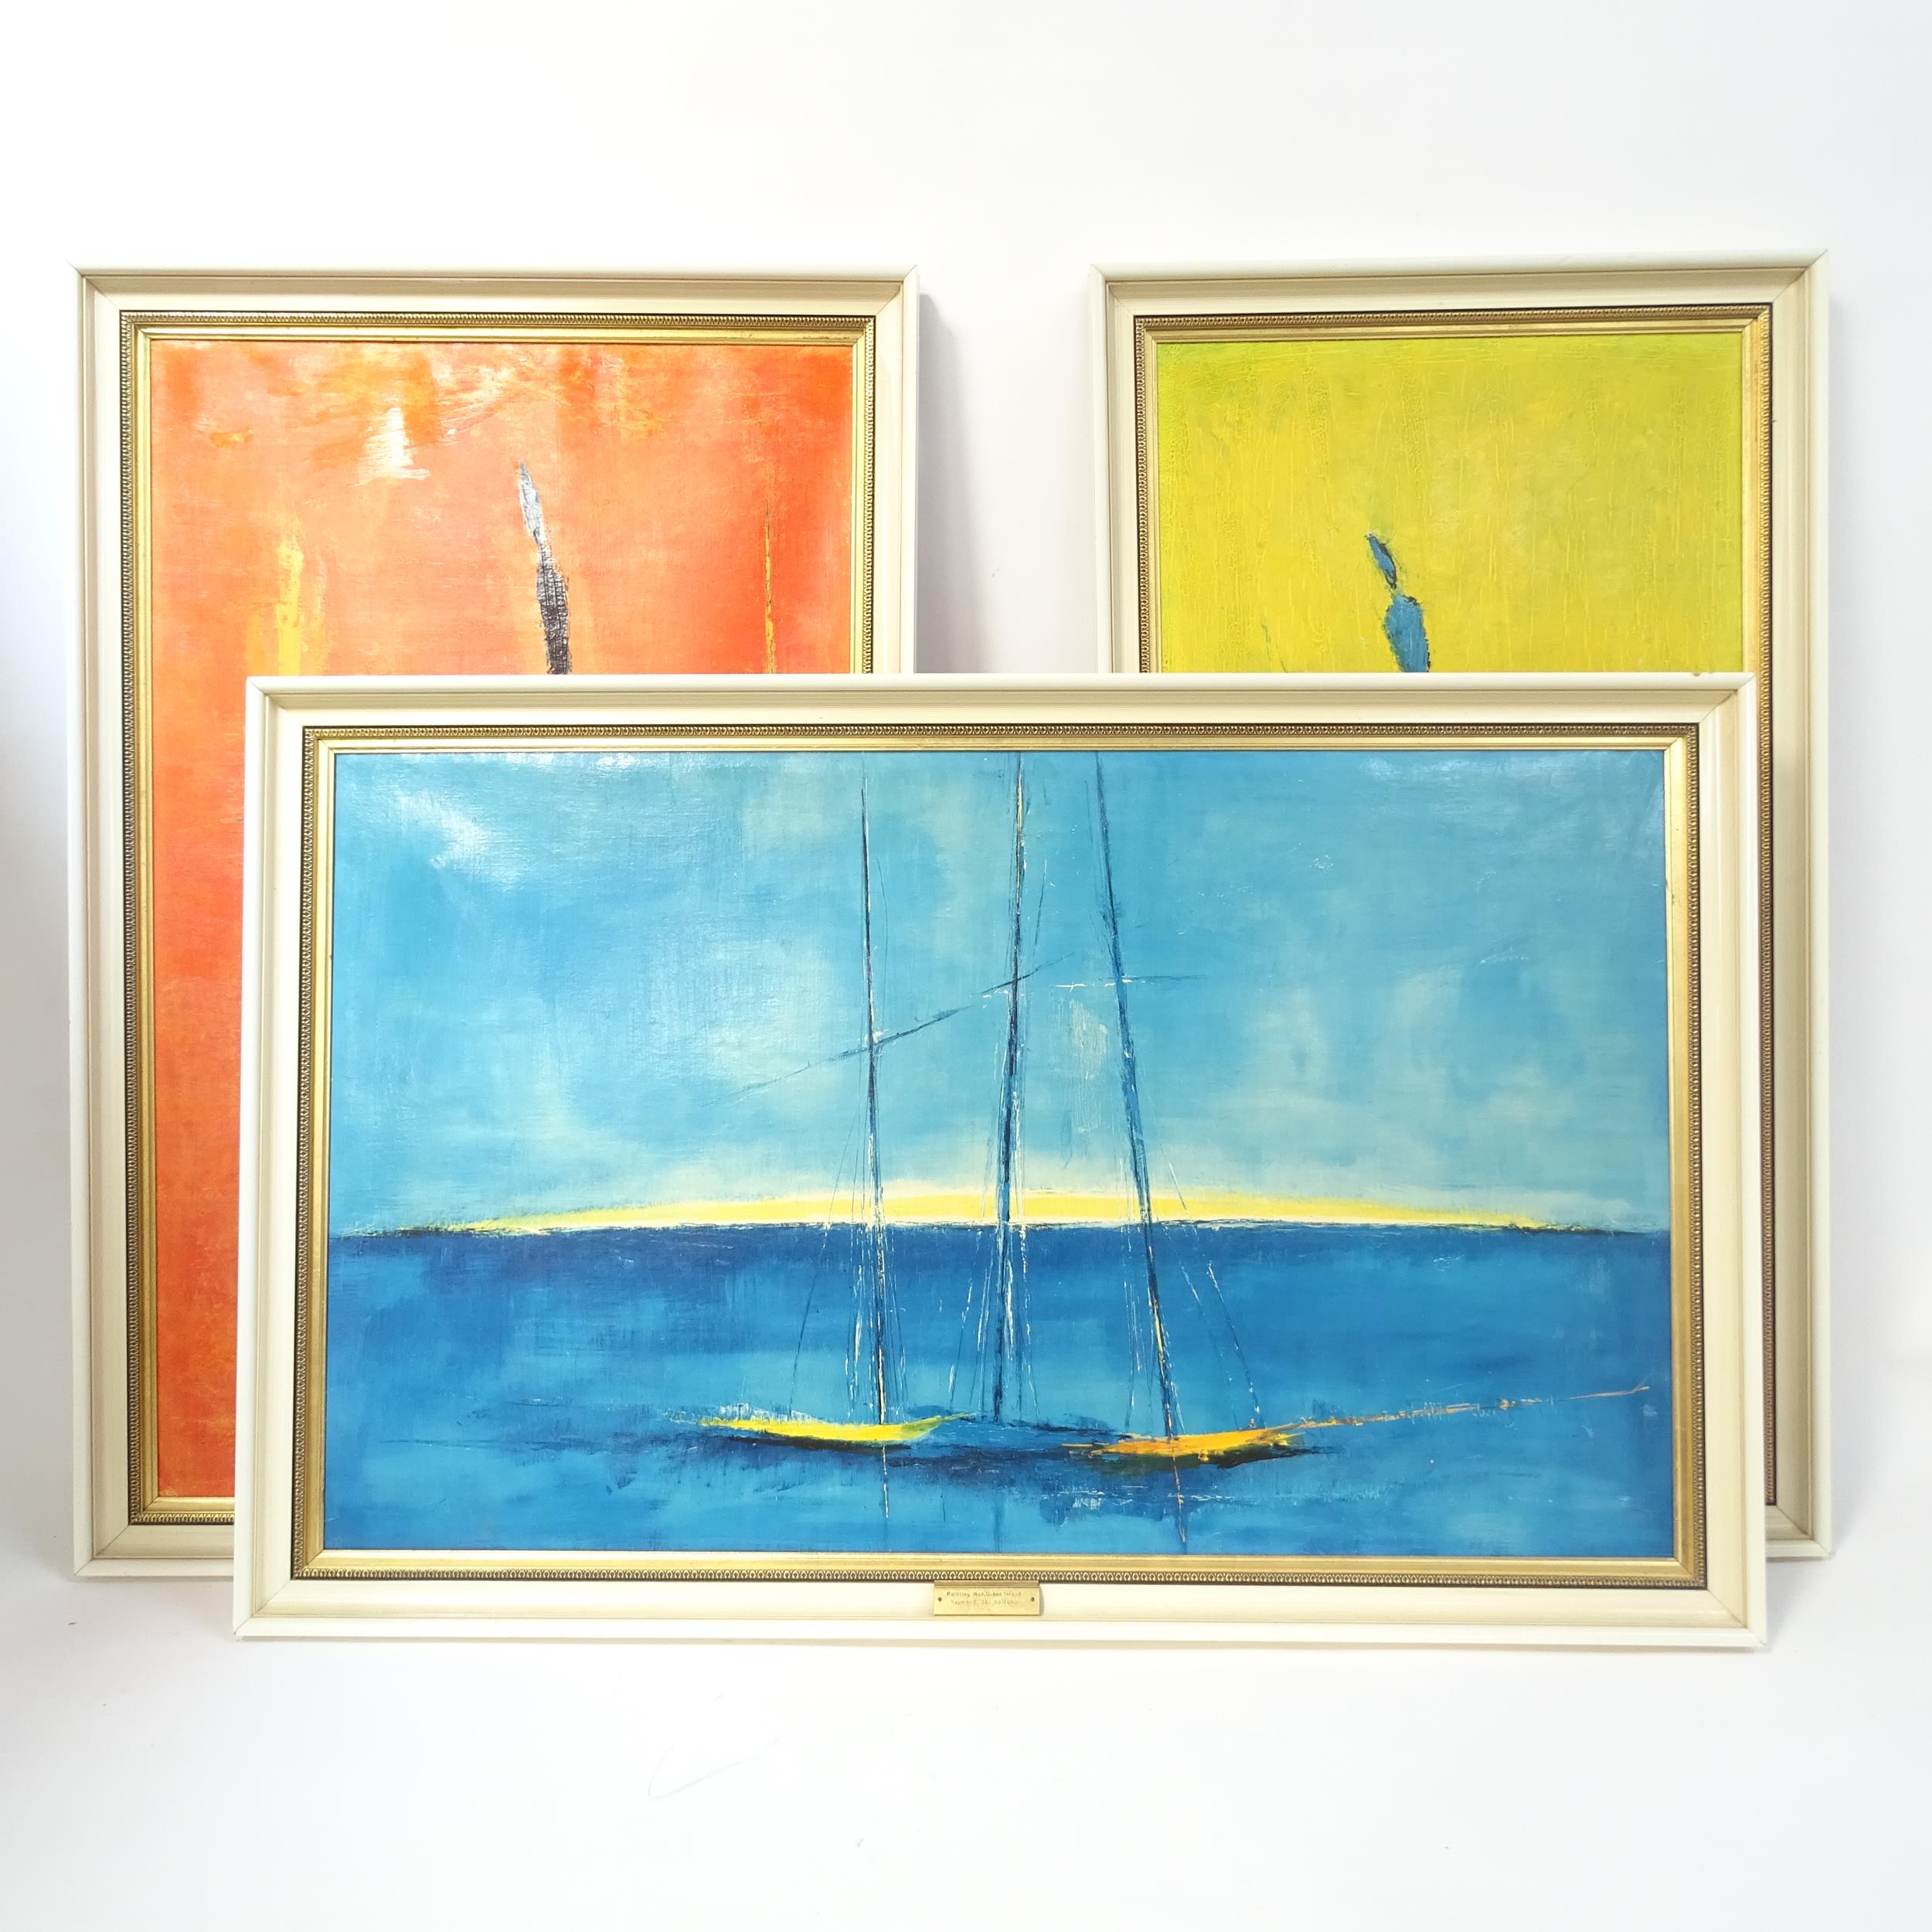 Raymond De Botton, 3 circa 1960s canvases, the white horse, painting number 1 green island, and